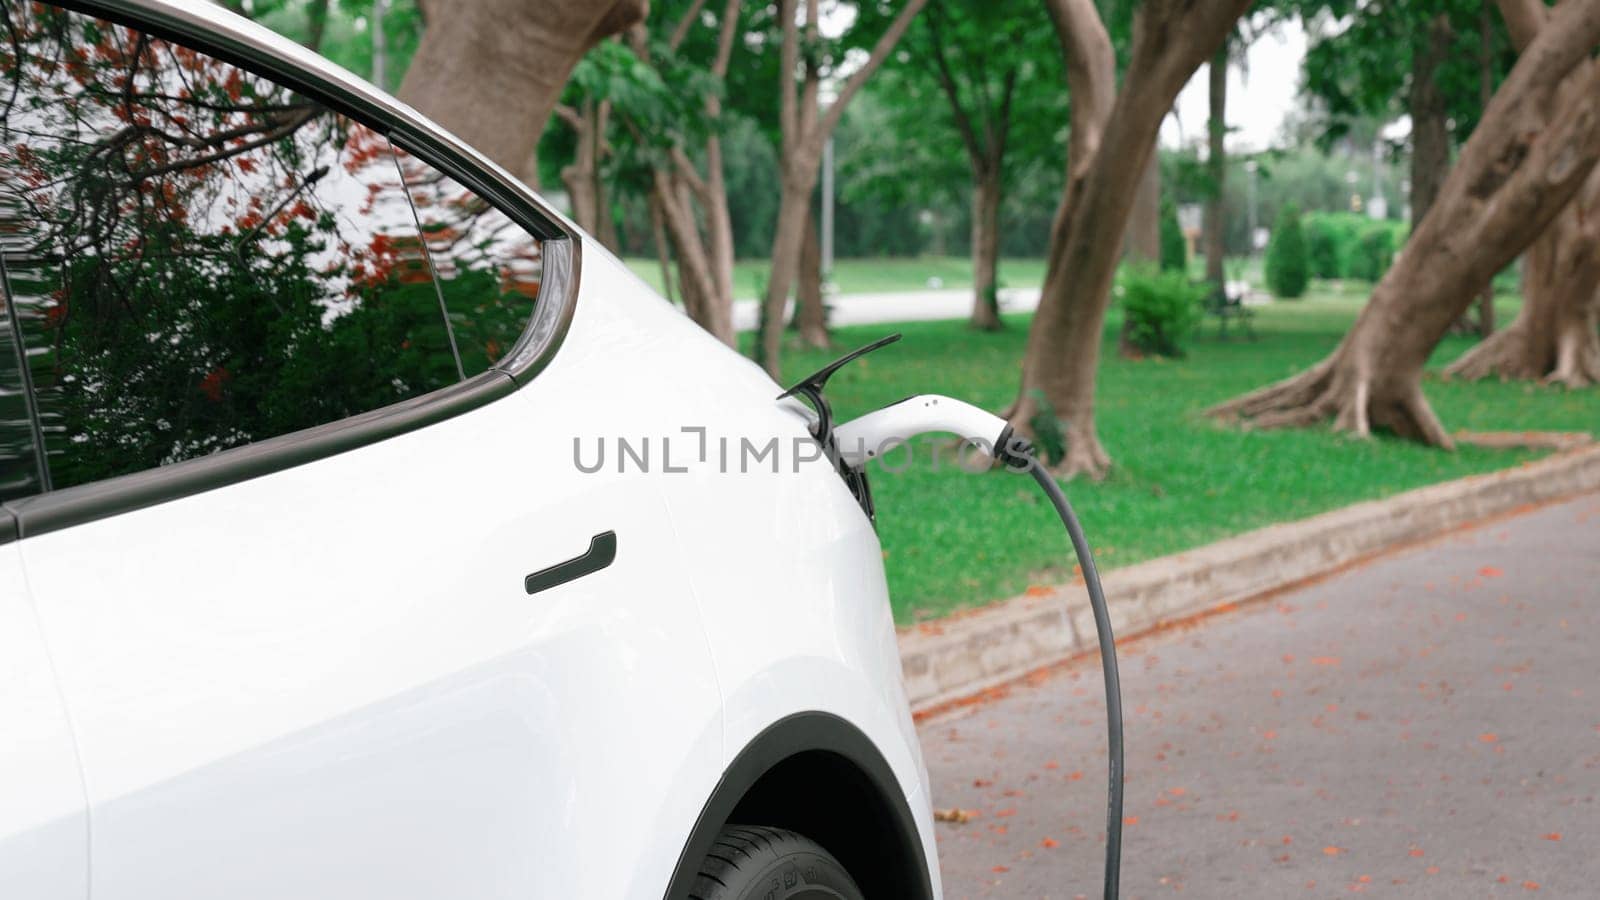 EV electric vehicle recharging battery from EV charging station in national park or outdoor forest scenic. Natural protection with eco friendly EV car travel in the summer woods. Exalt